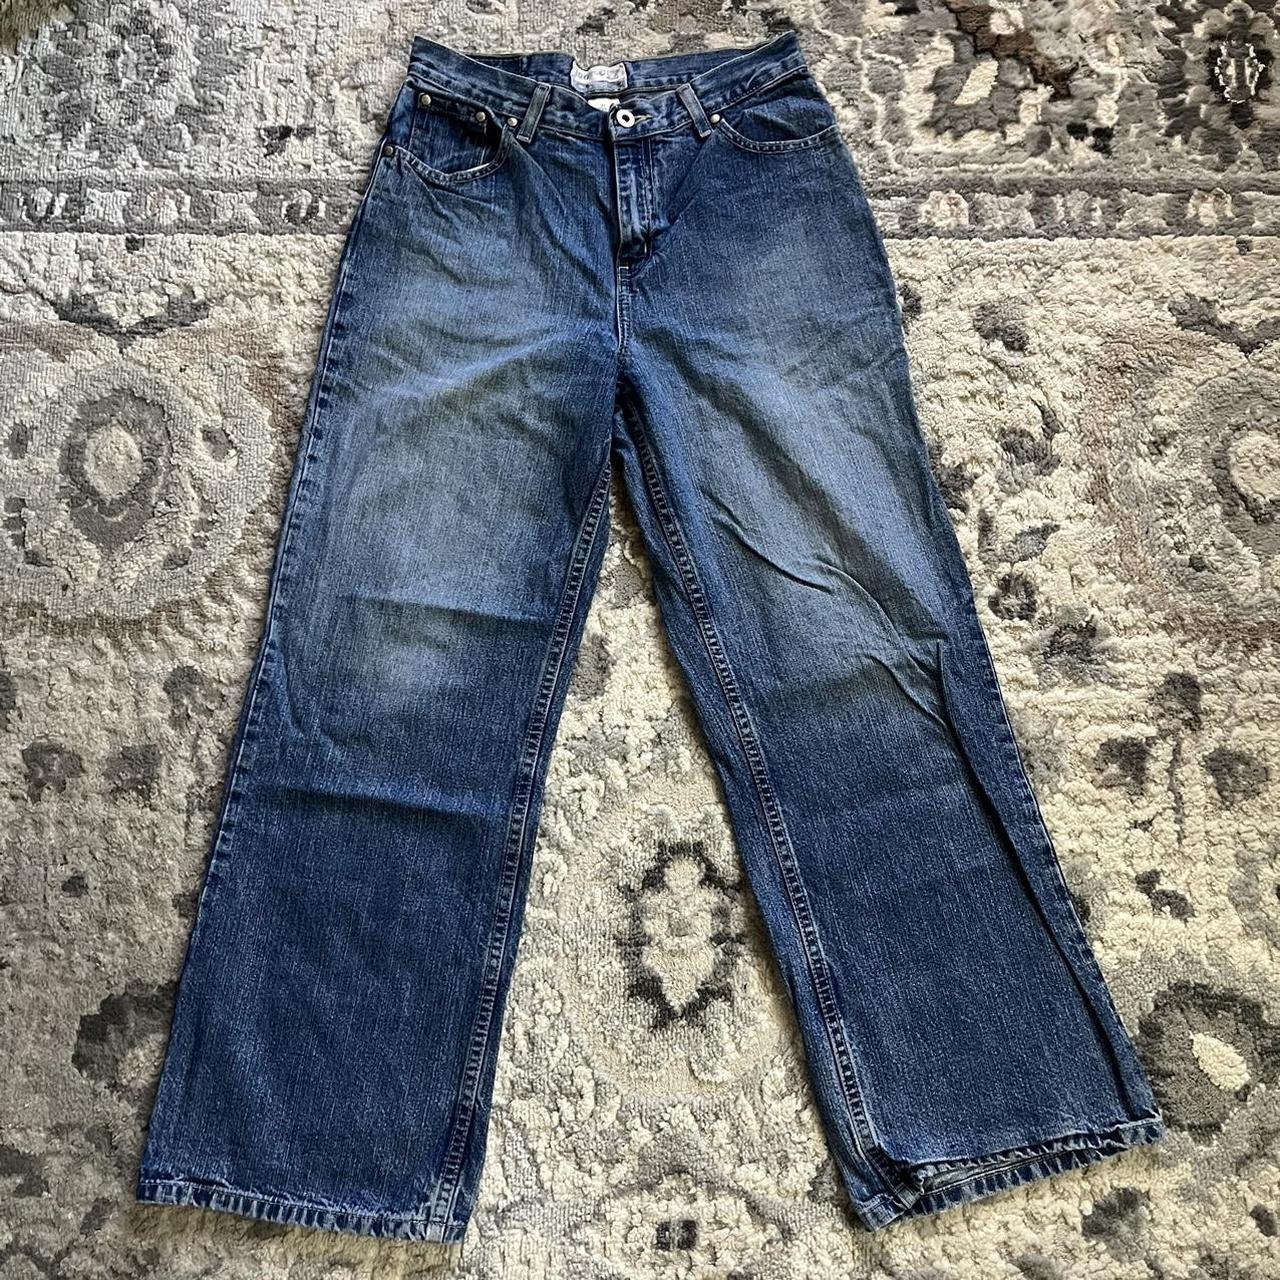 Gently used jeans price negotiable also vintage - Depop